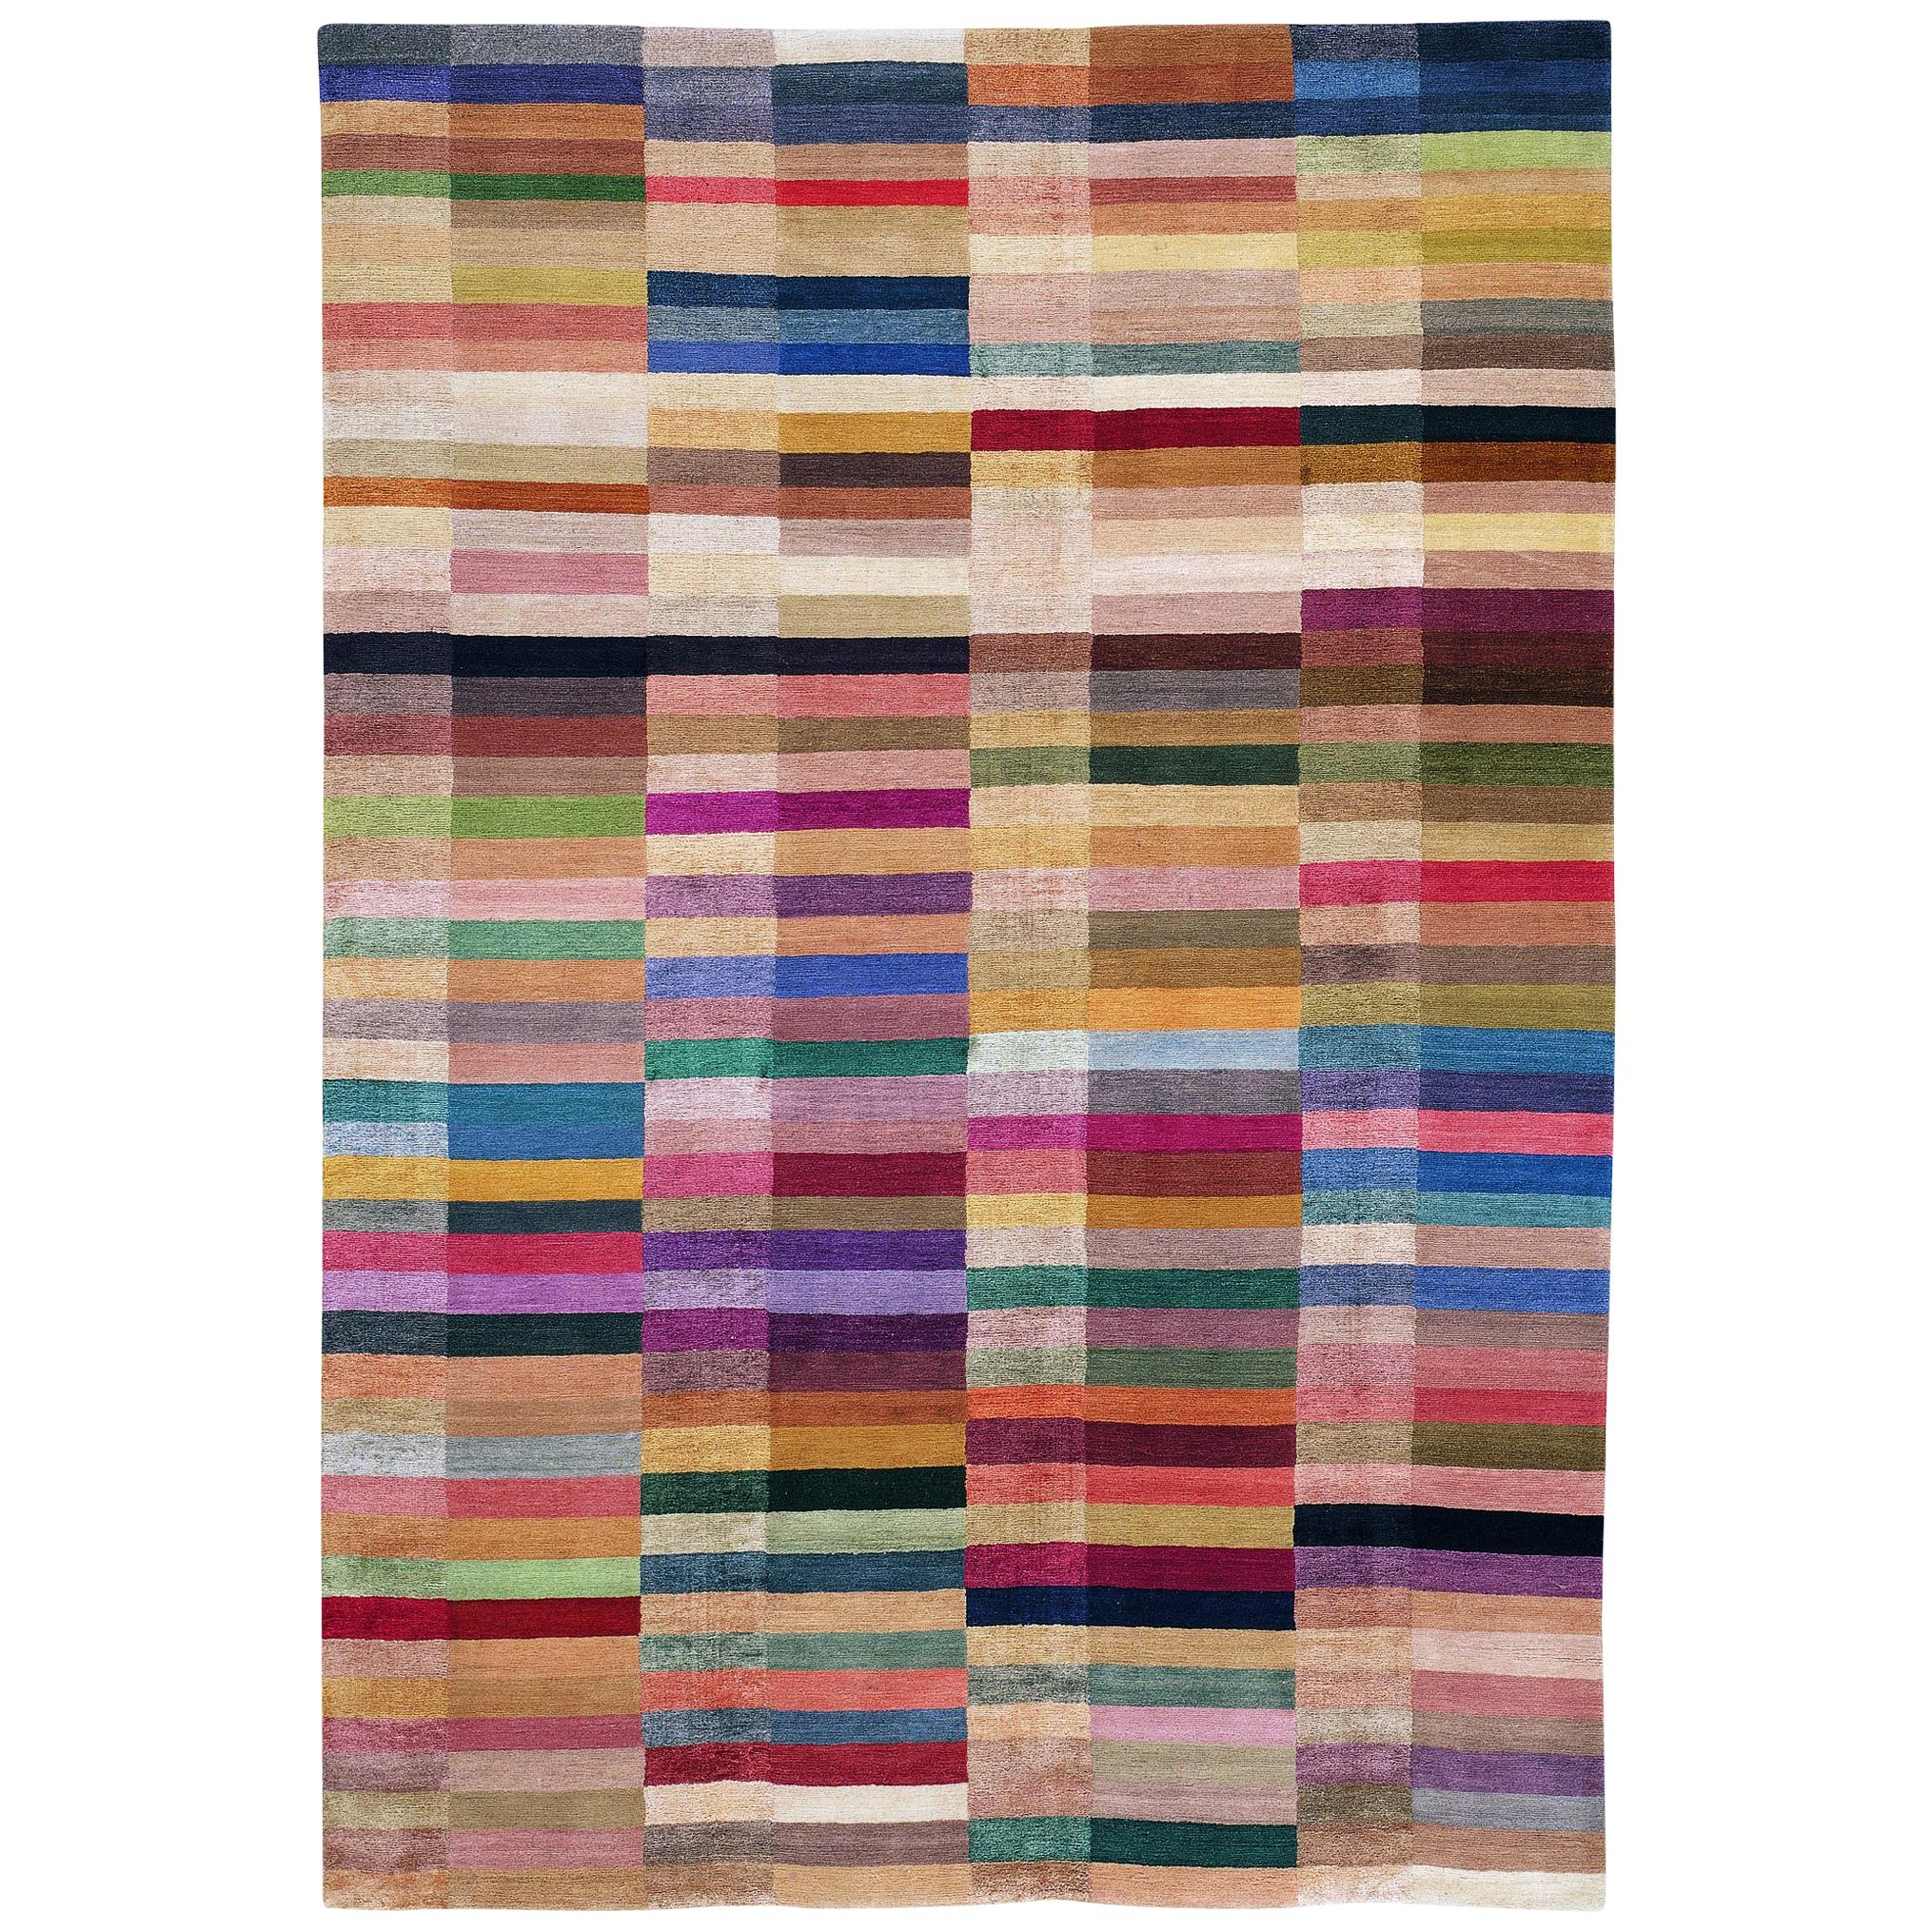 Spectrum Hand-Knotted 10x8 Rug in Wool and Silk by The Rug Company